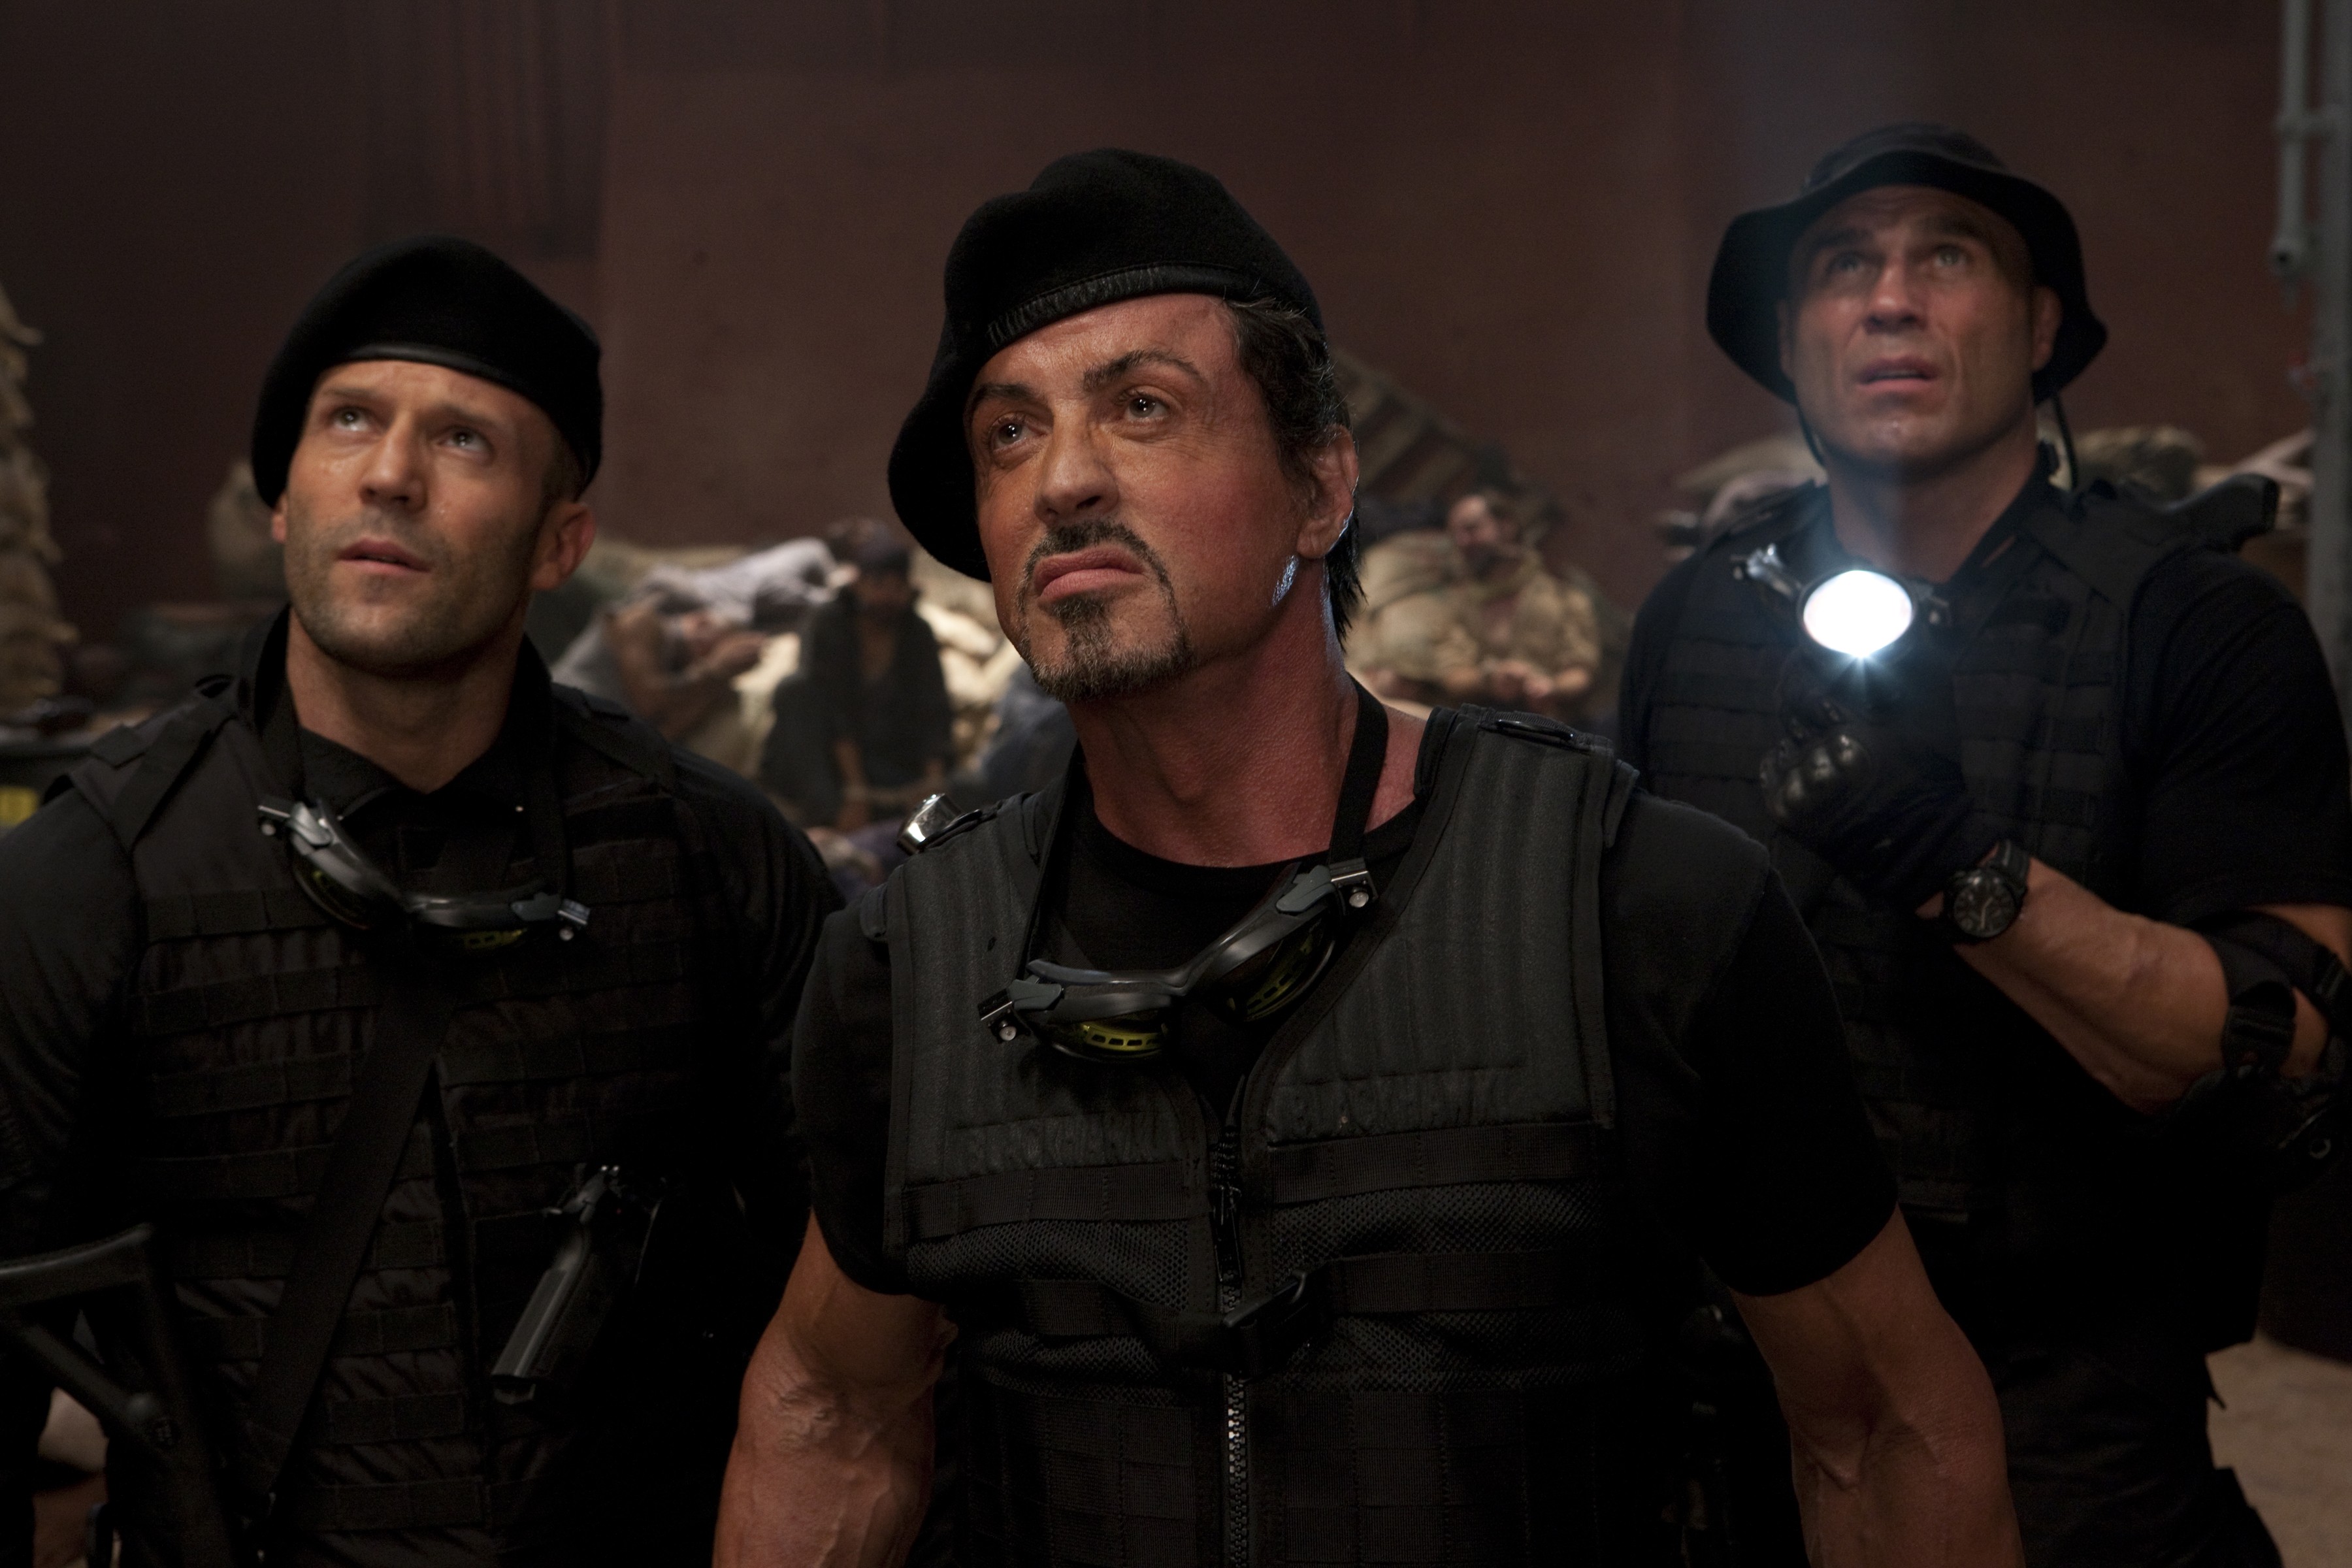 The Expendables, UFC, Sylvester Stallone, Dolph Lundgren, Randy Couture